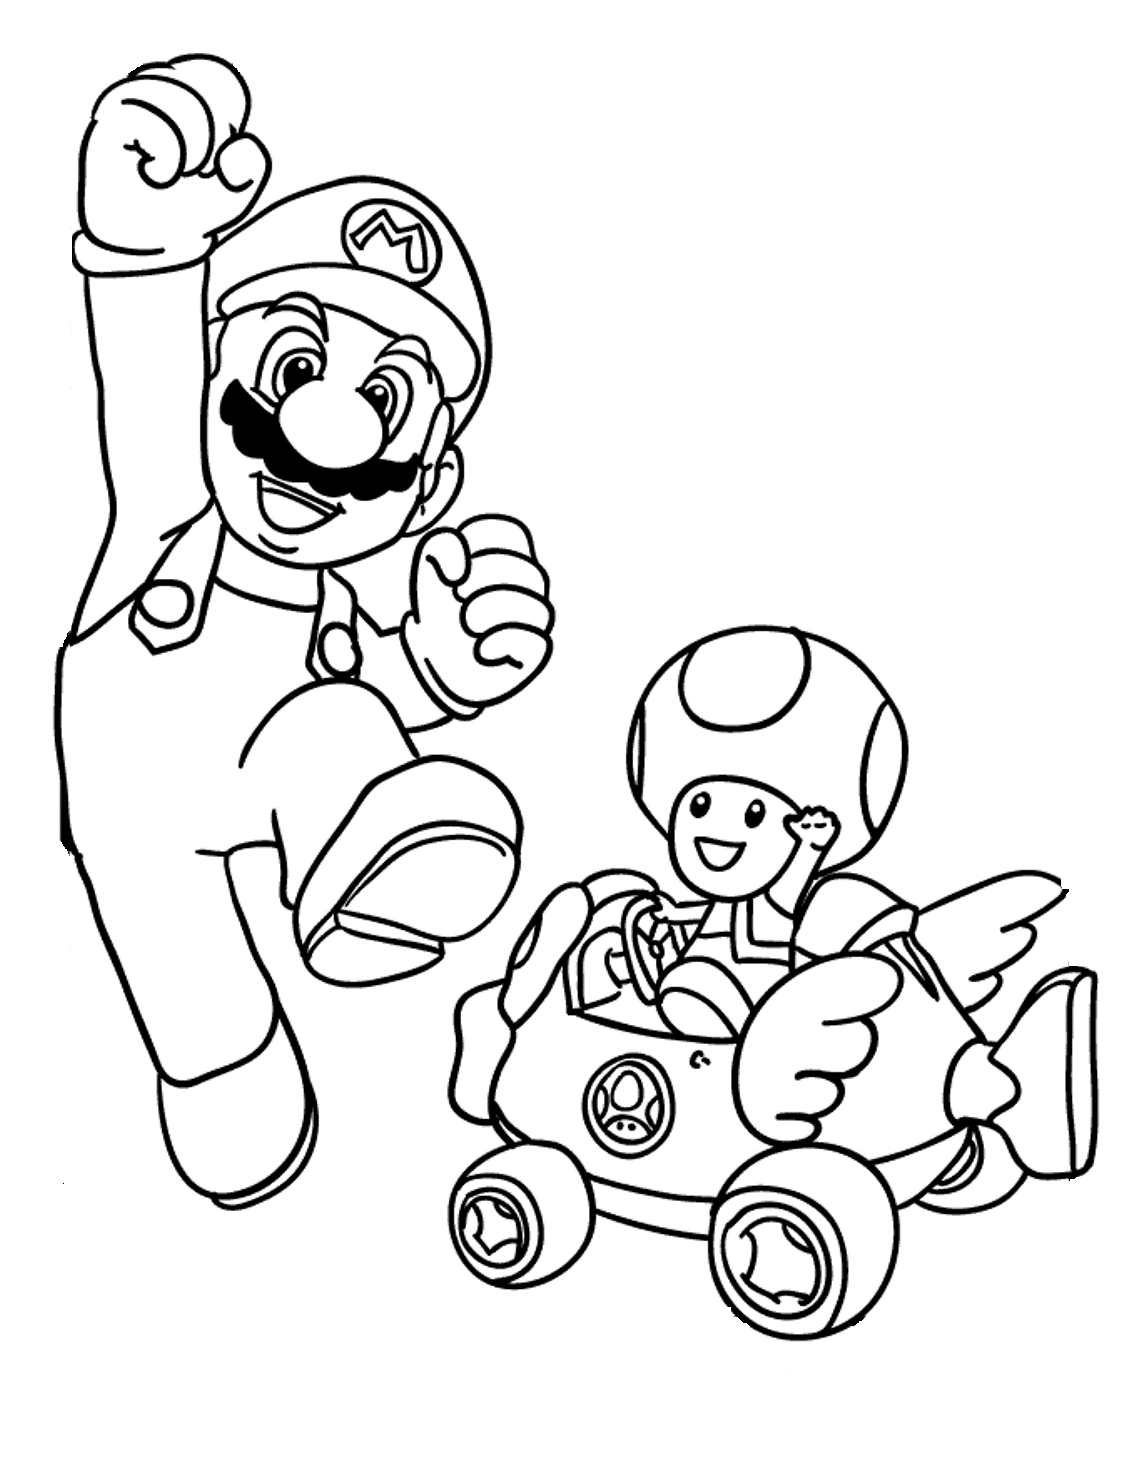 Mario Brothers   Coloring Pages For Kids And For Adults   Coloring ...